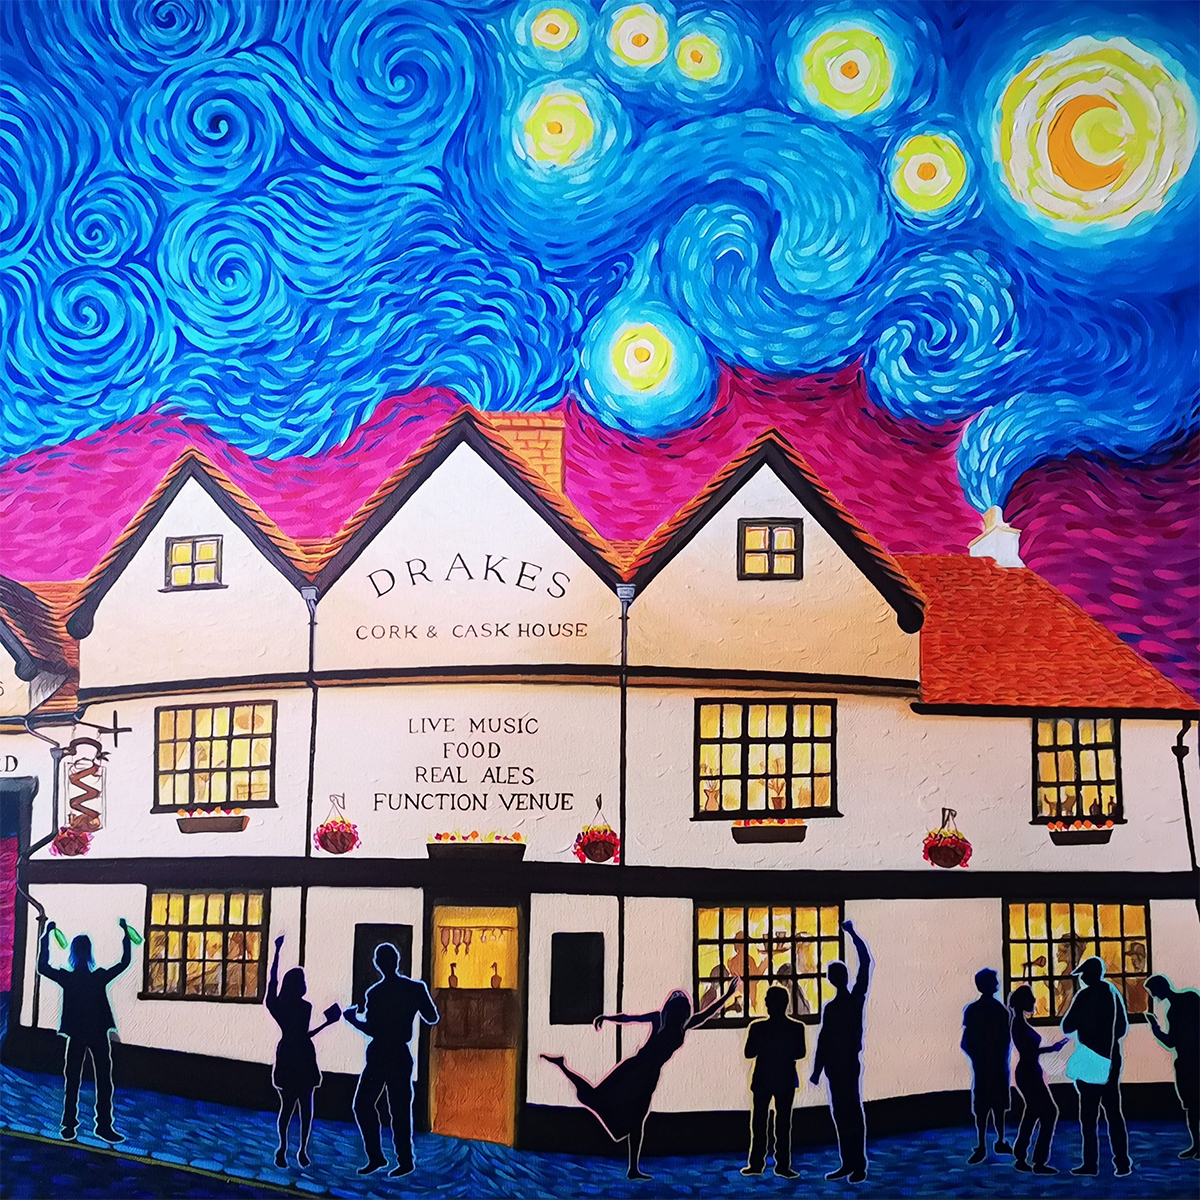 Starry Night over the Drake’s